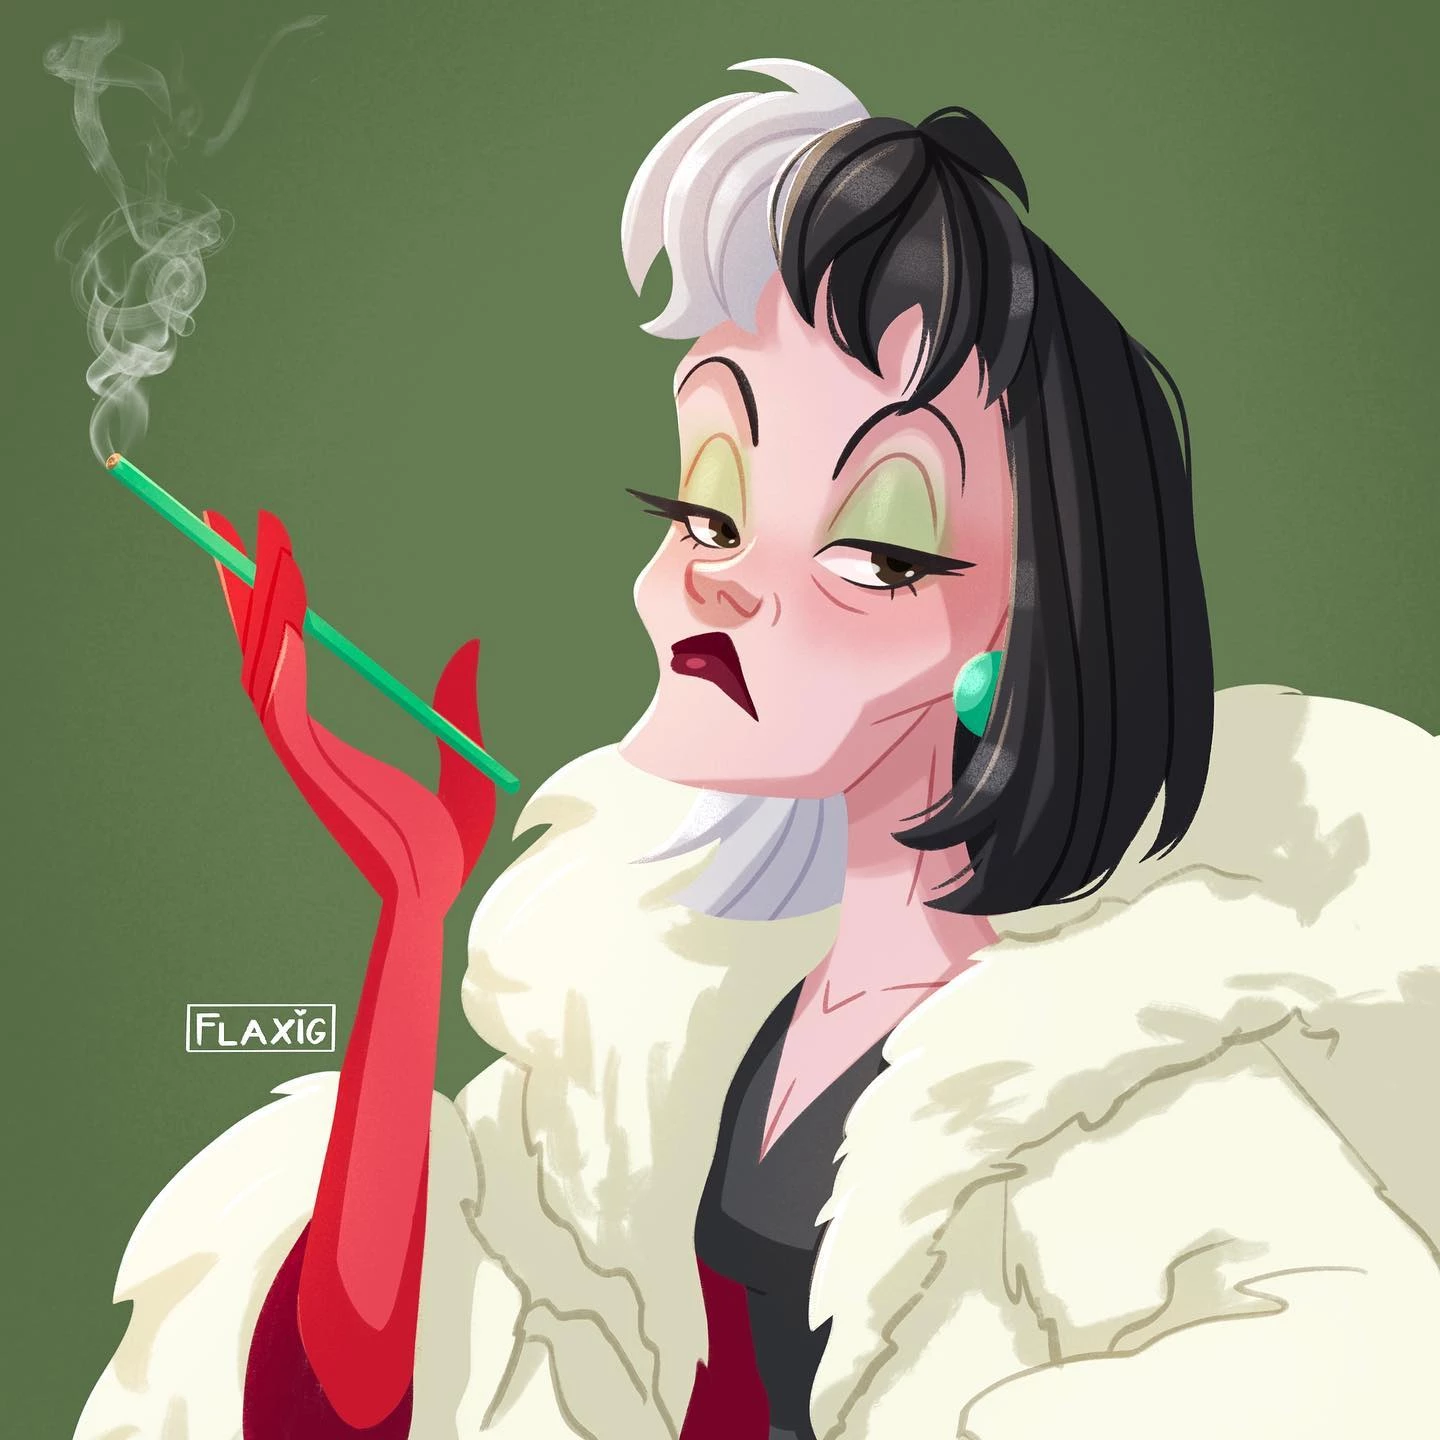 Animated Version Of Cruella With Her Favorite Cane